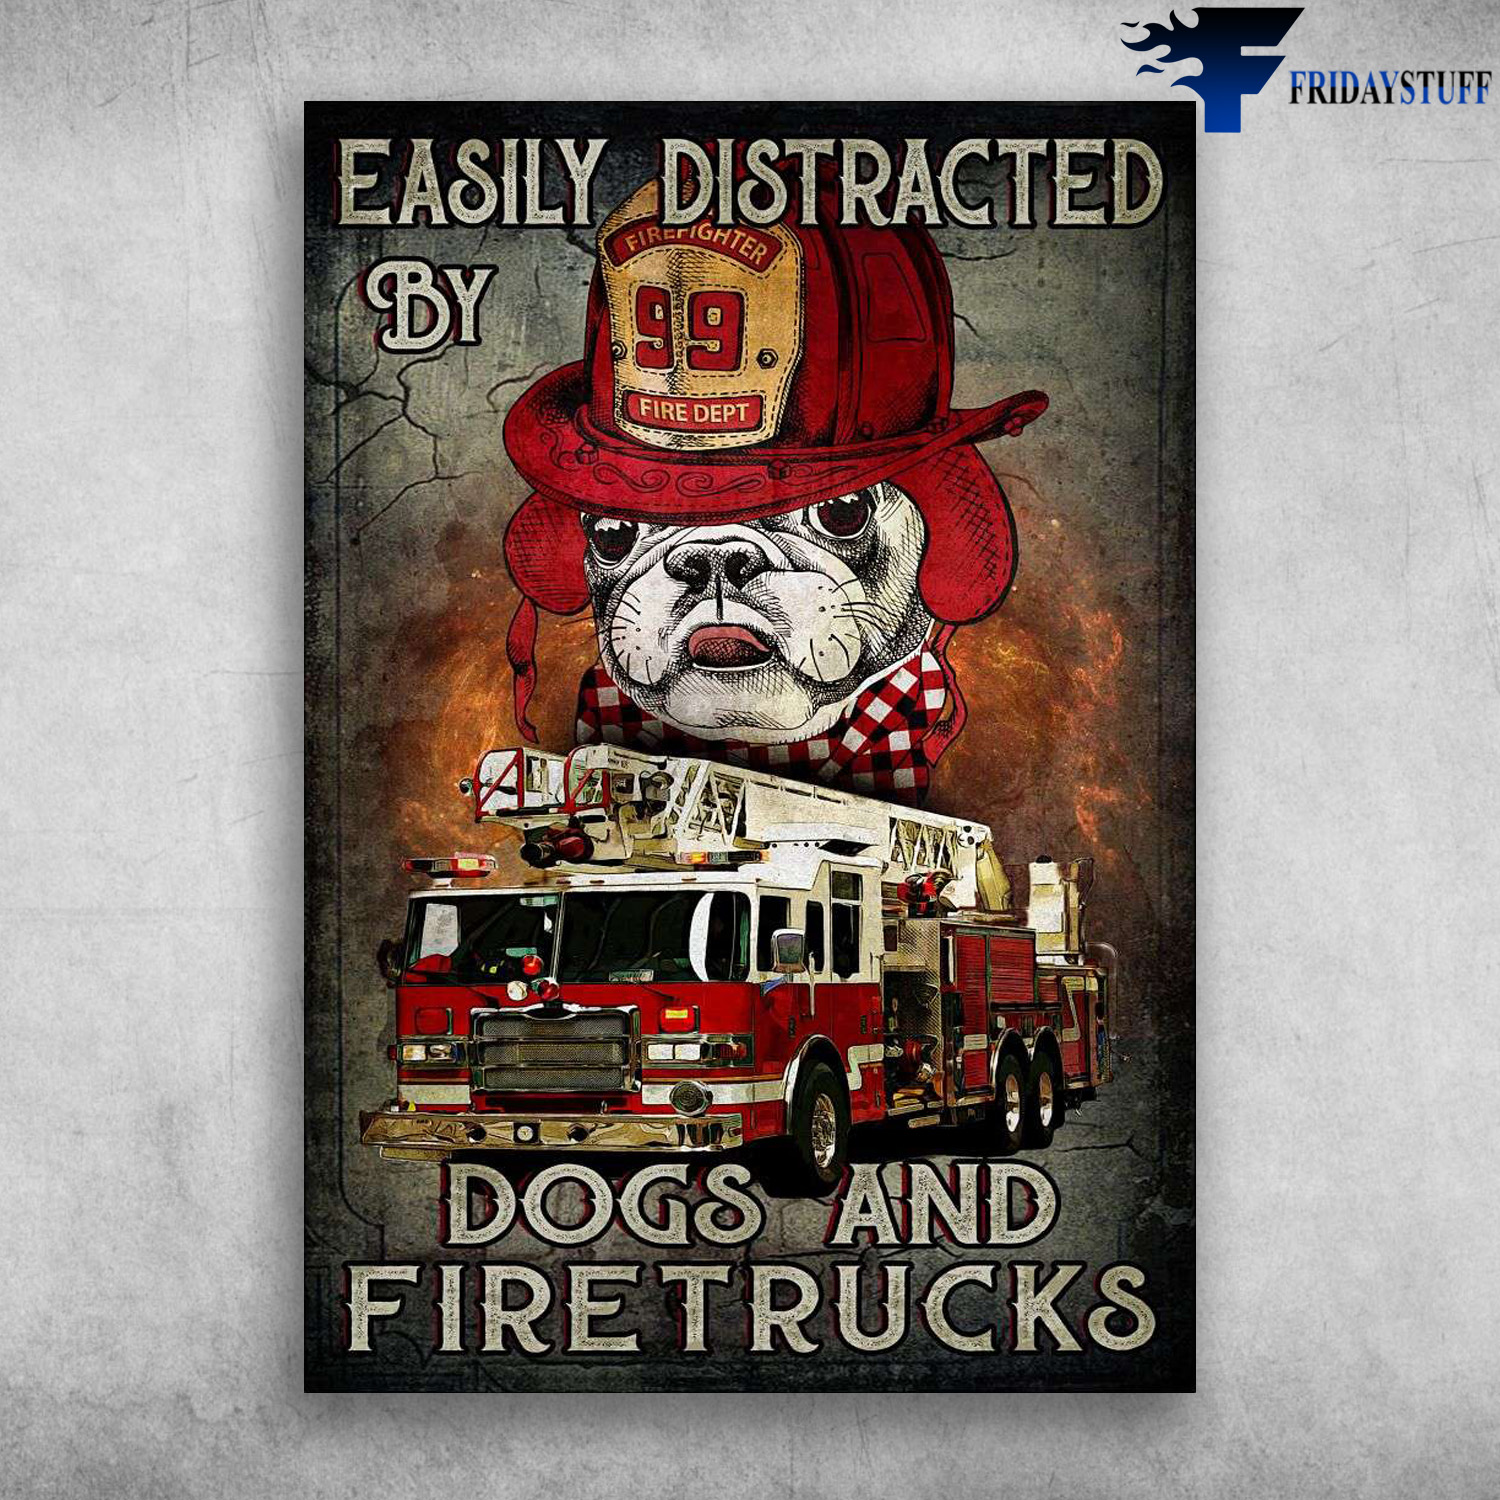 Pug Firefighter - Easily Distracted By, Dogs And Firetrucks